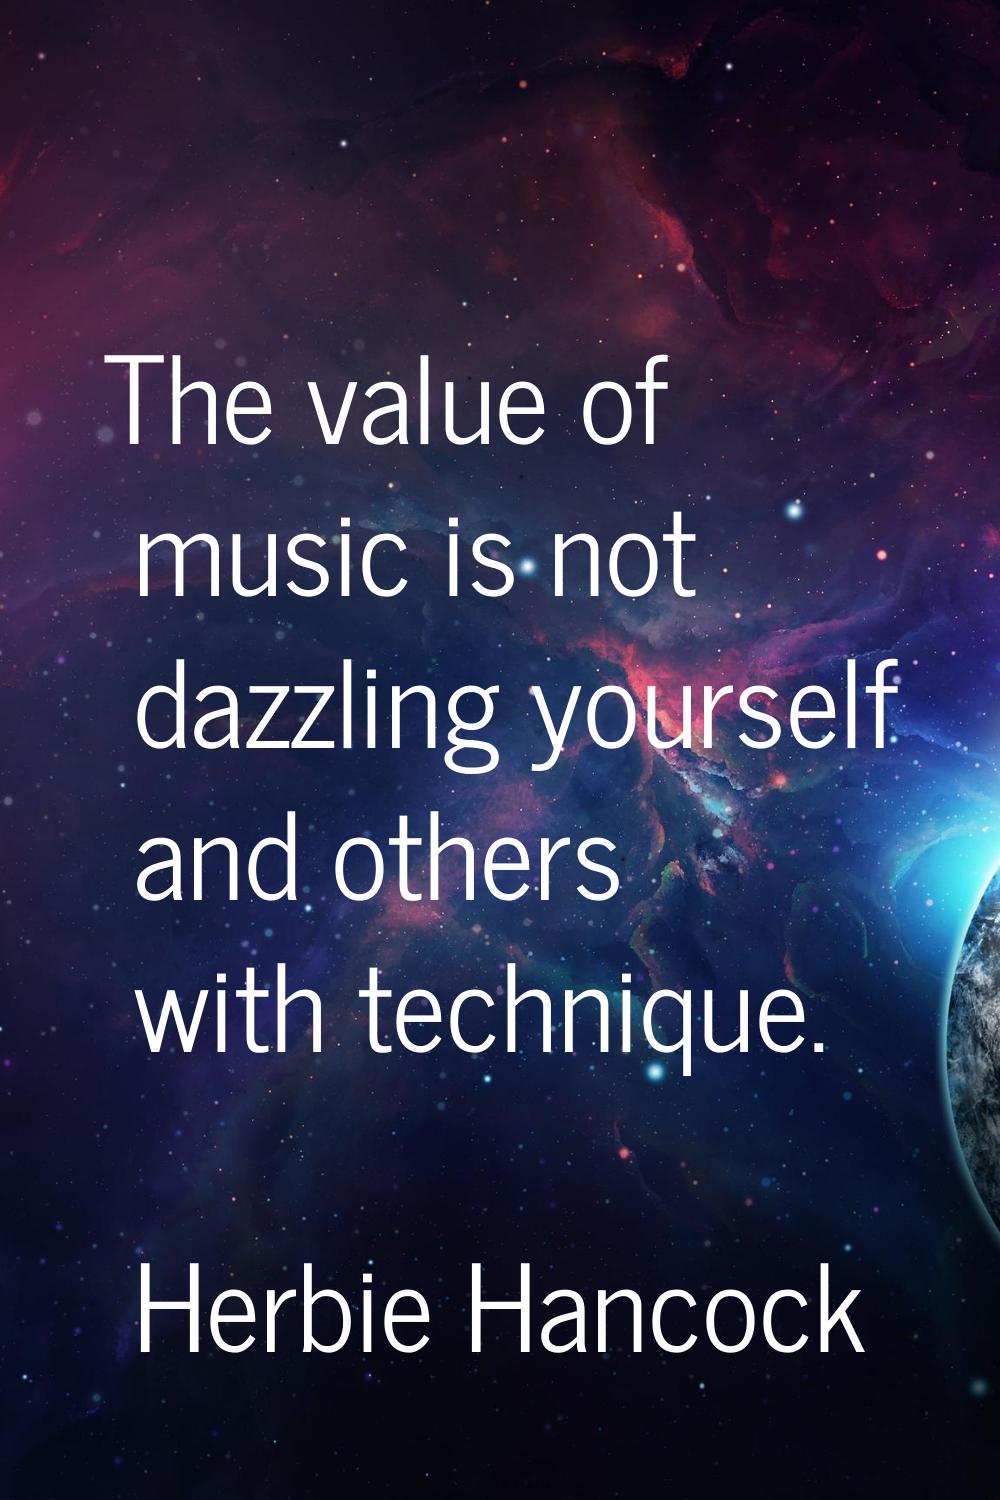 The value of music is not dazzling yourself and others with technique.